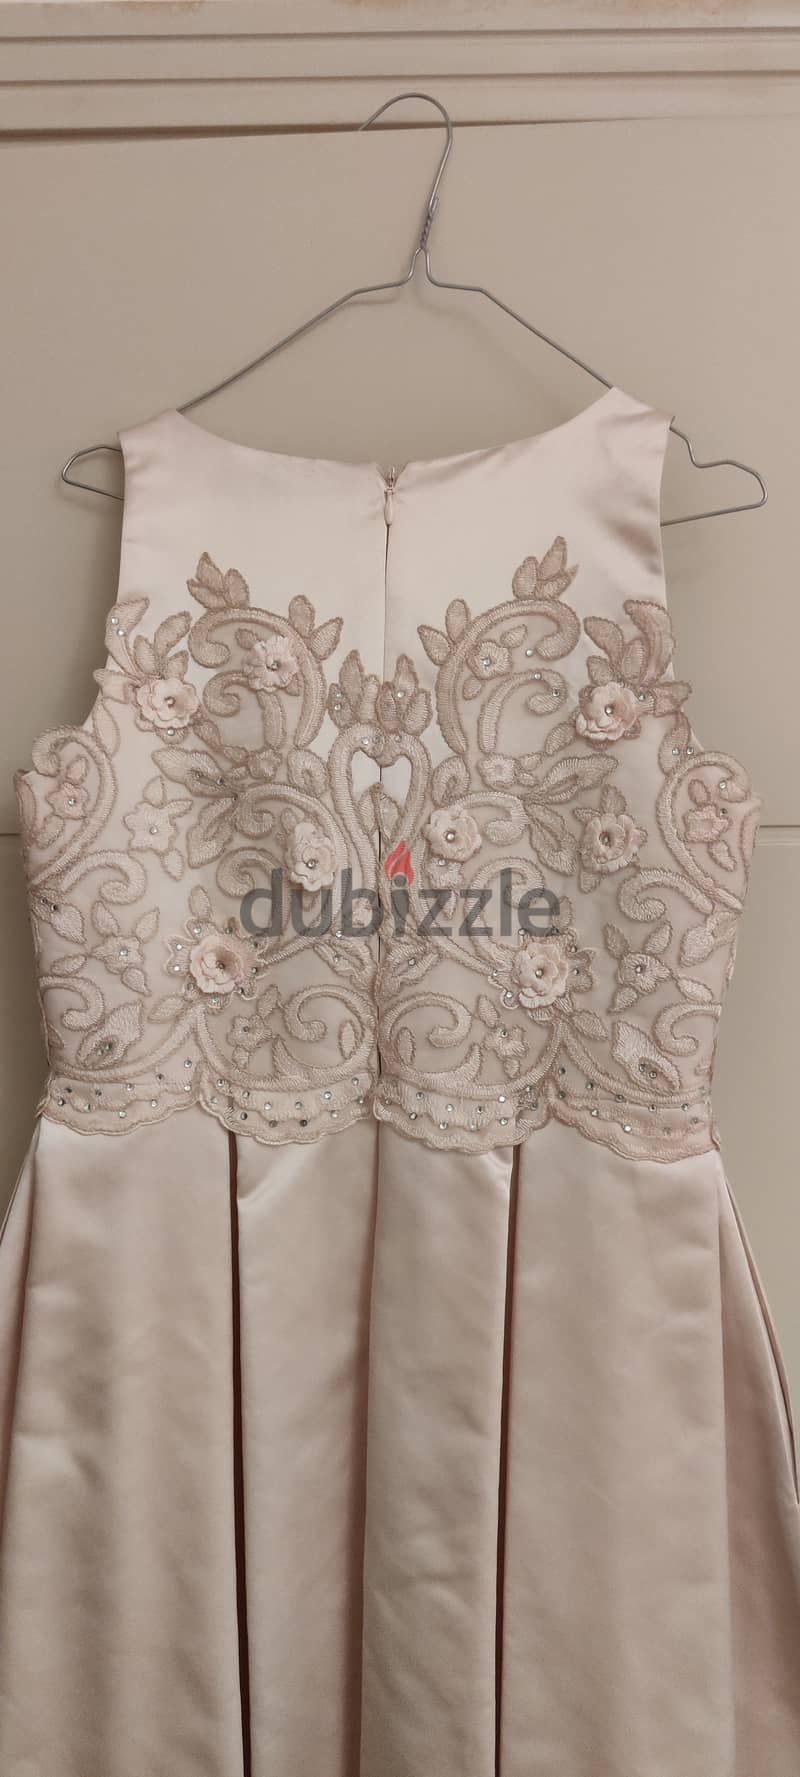 Pink satin dress with floral embroidery on the bodice 3